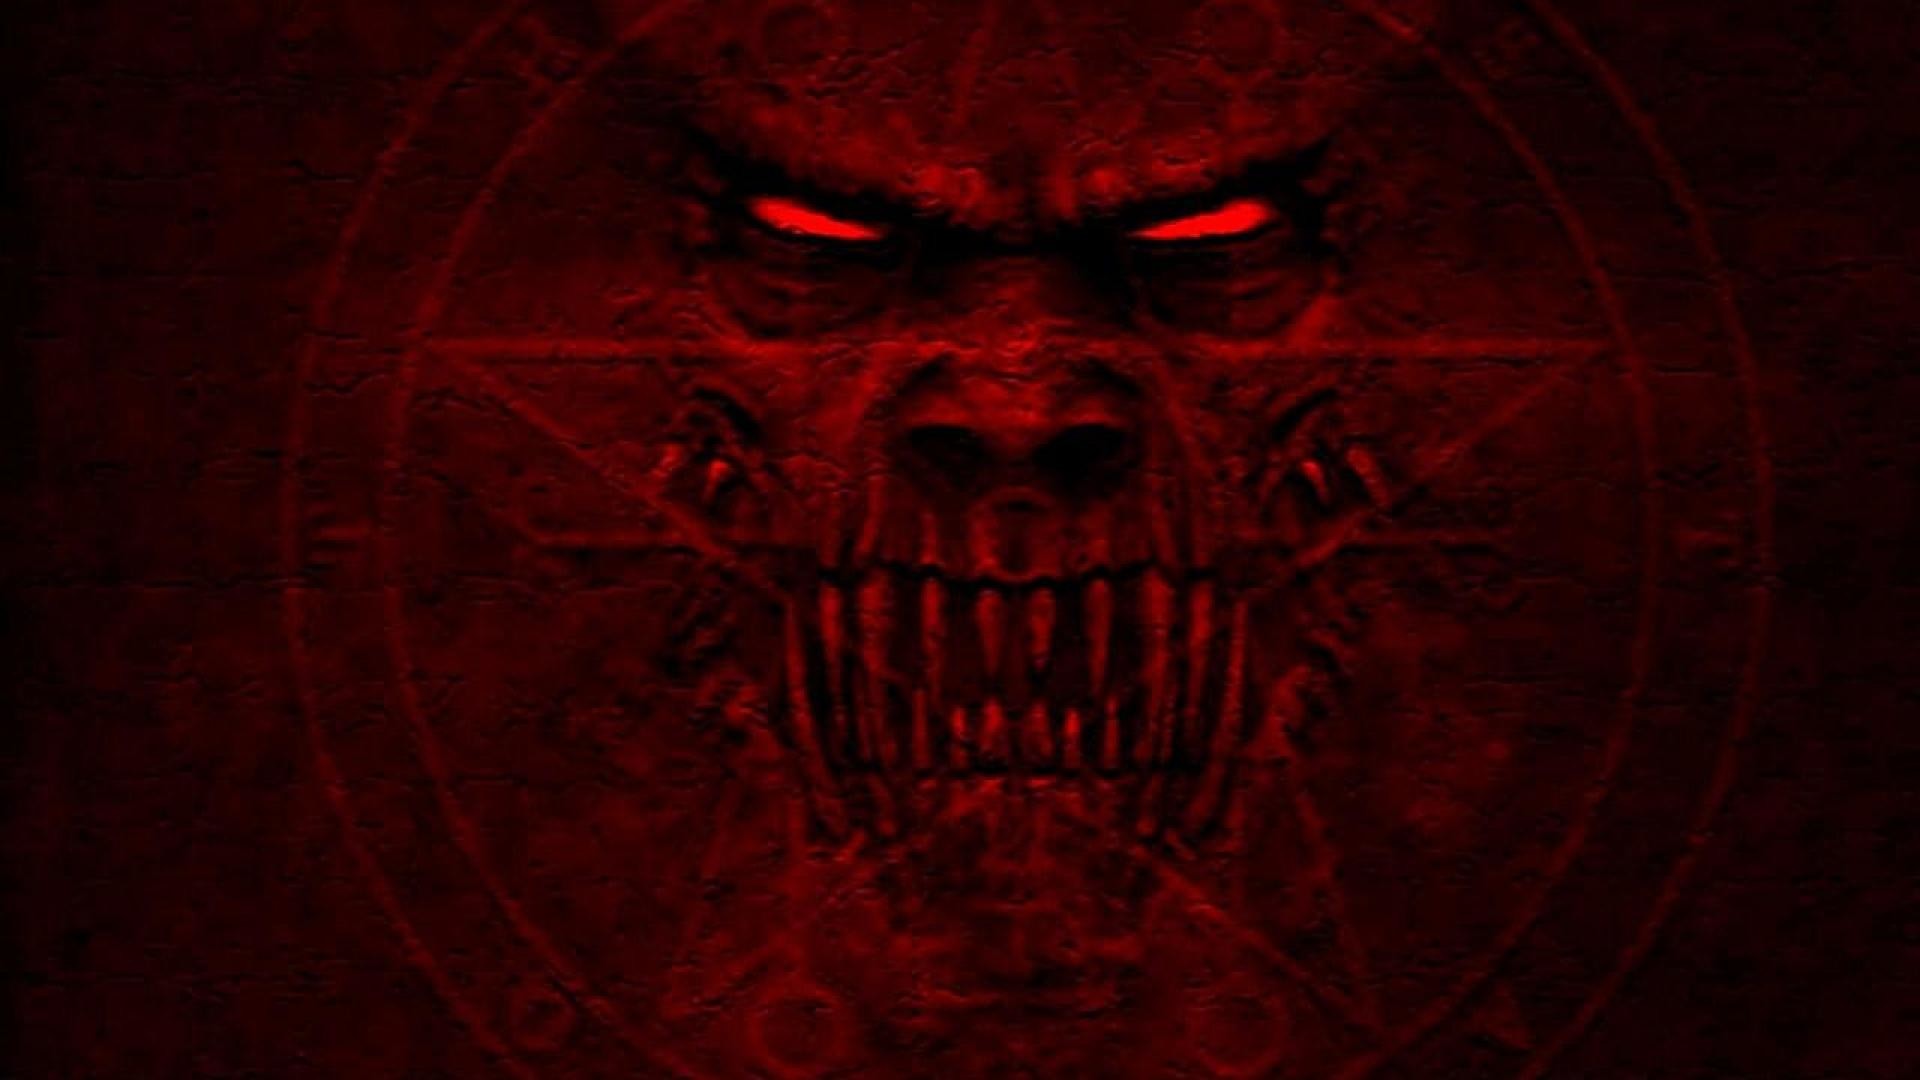 1920x1080 Satan - (#98747) - High Quality and Resolution Wallpapers on .